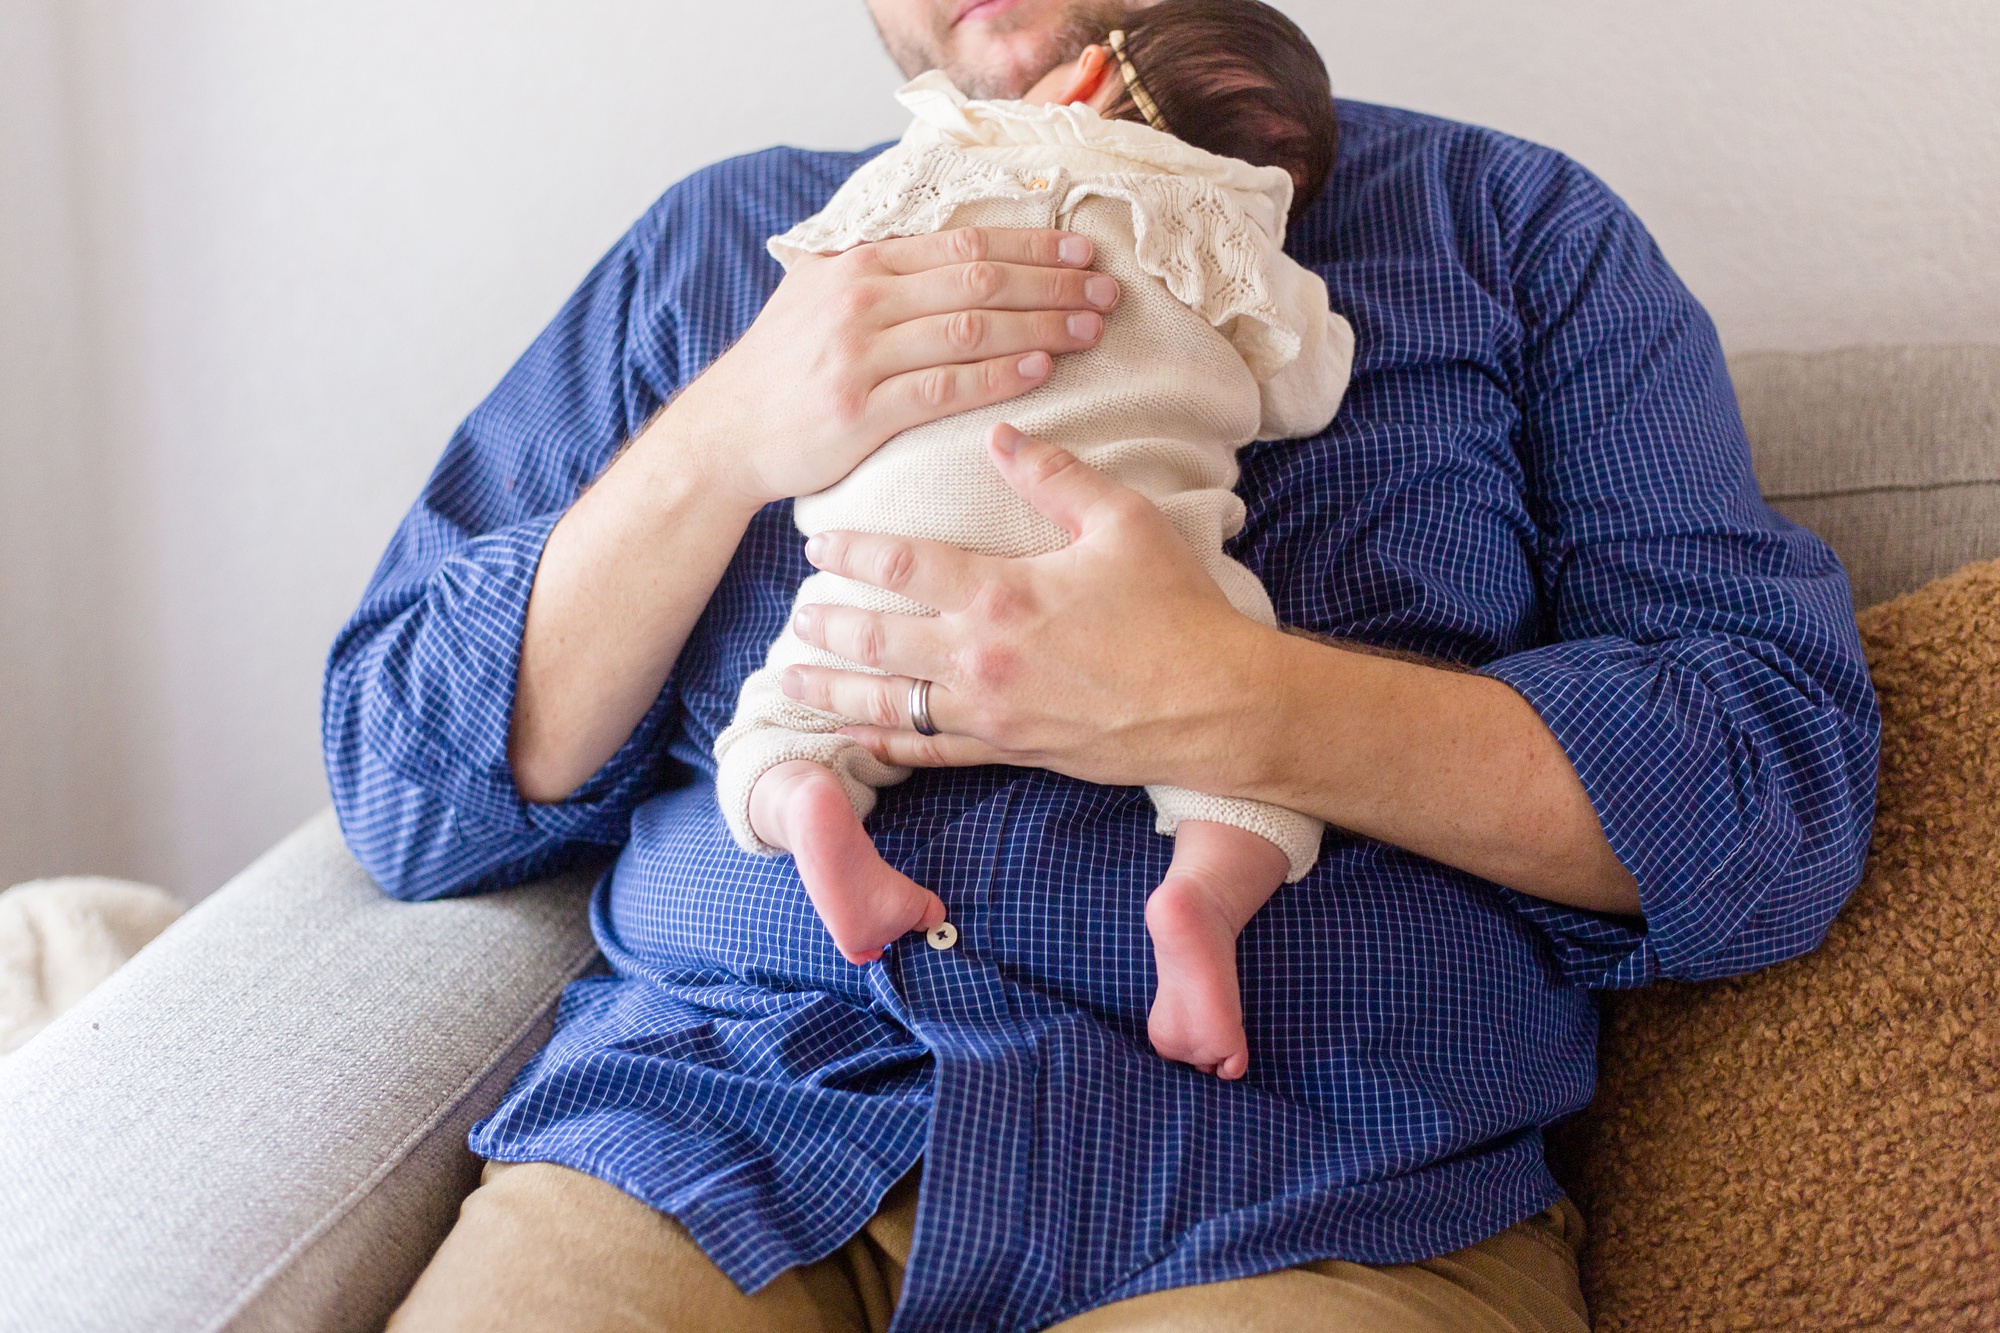 lifestyle newborn photos of baby girl and dad